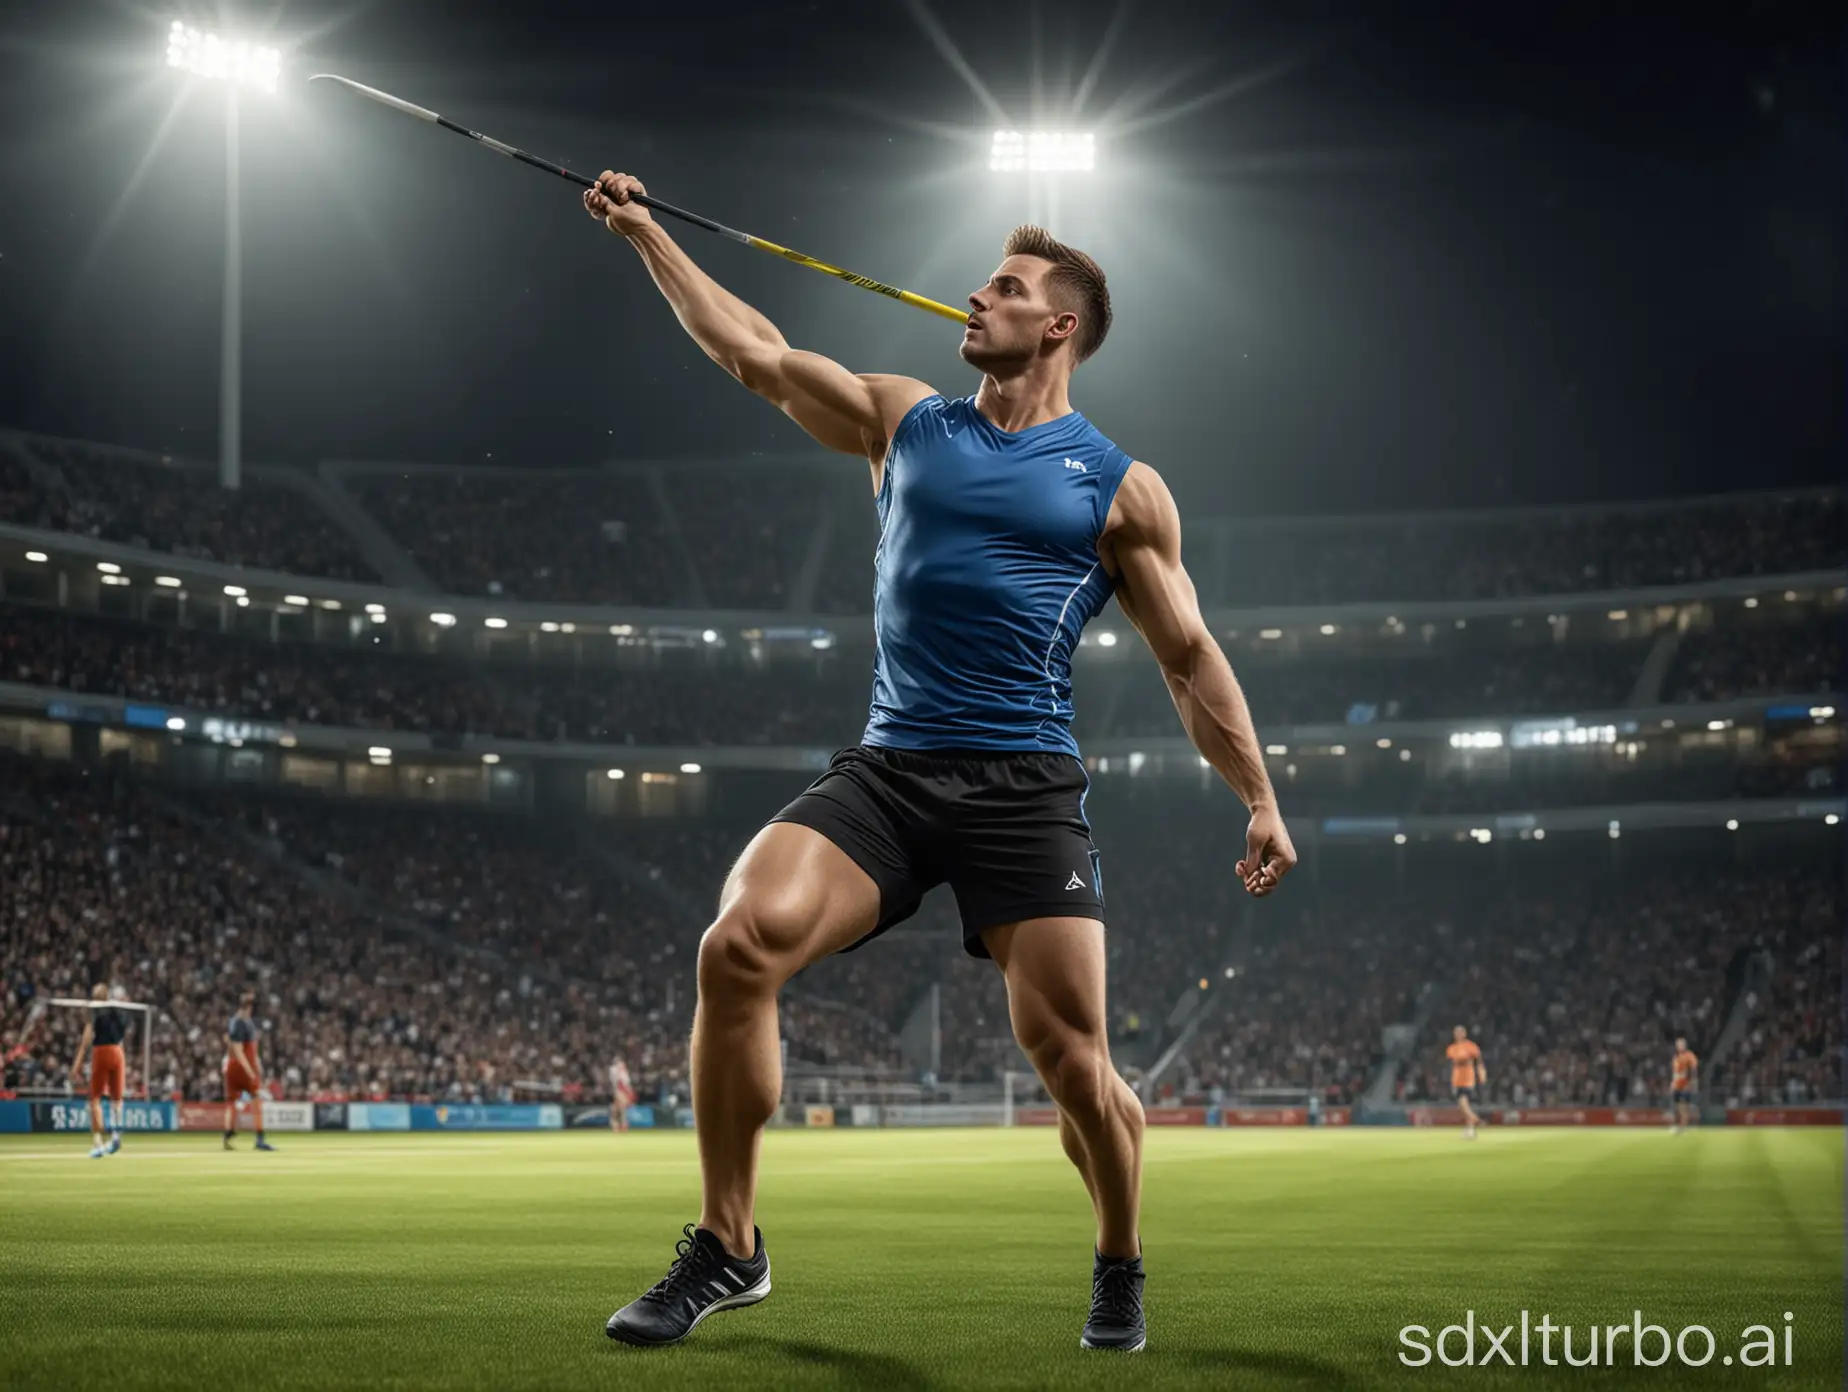 Photorealistic-Male-Javelin-Thrower-Competing-in-a-Floodlit-Stadium-at-Night